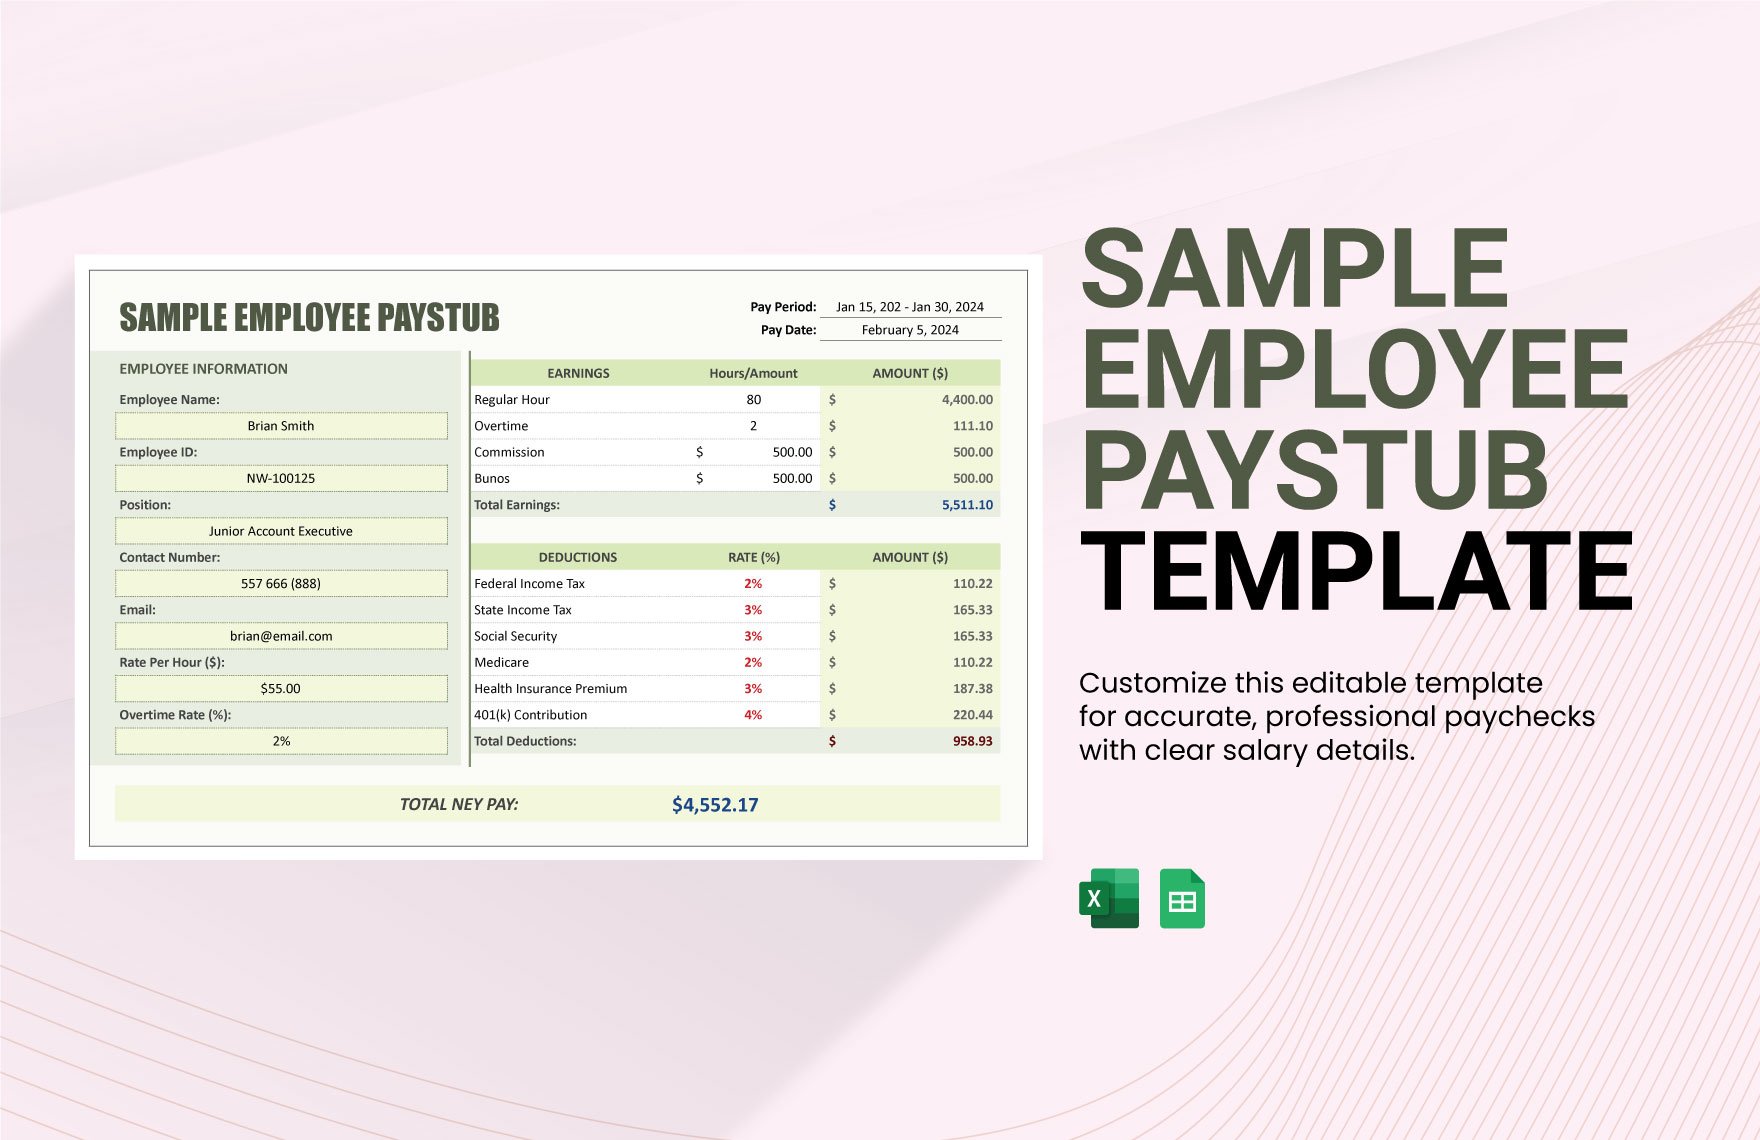 Sample Employee Paystub Template in Excel, Google Sheets